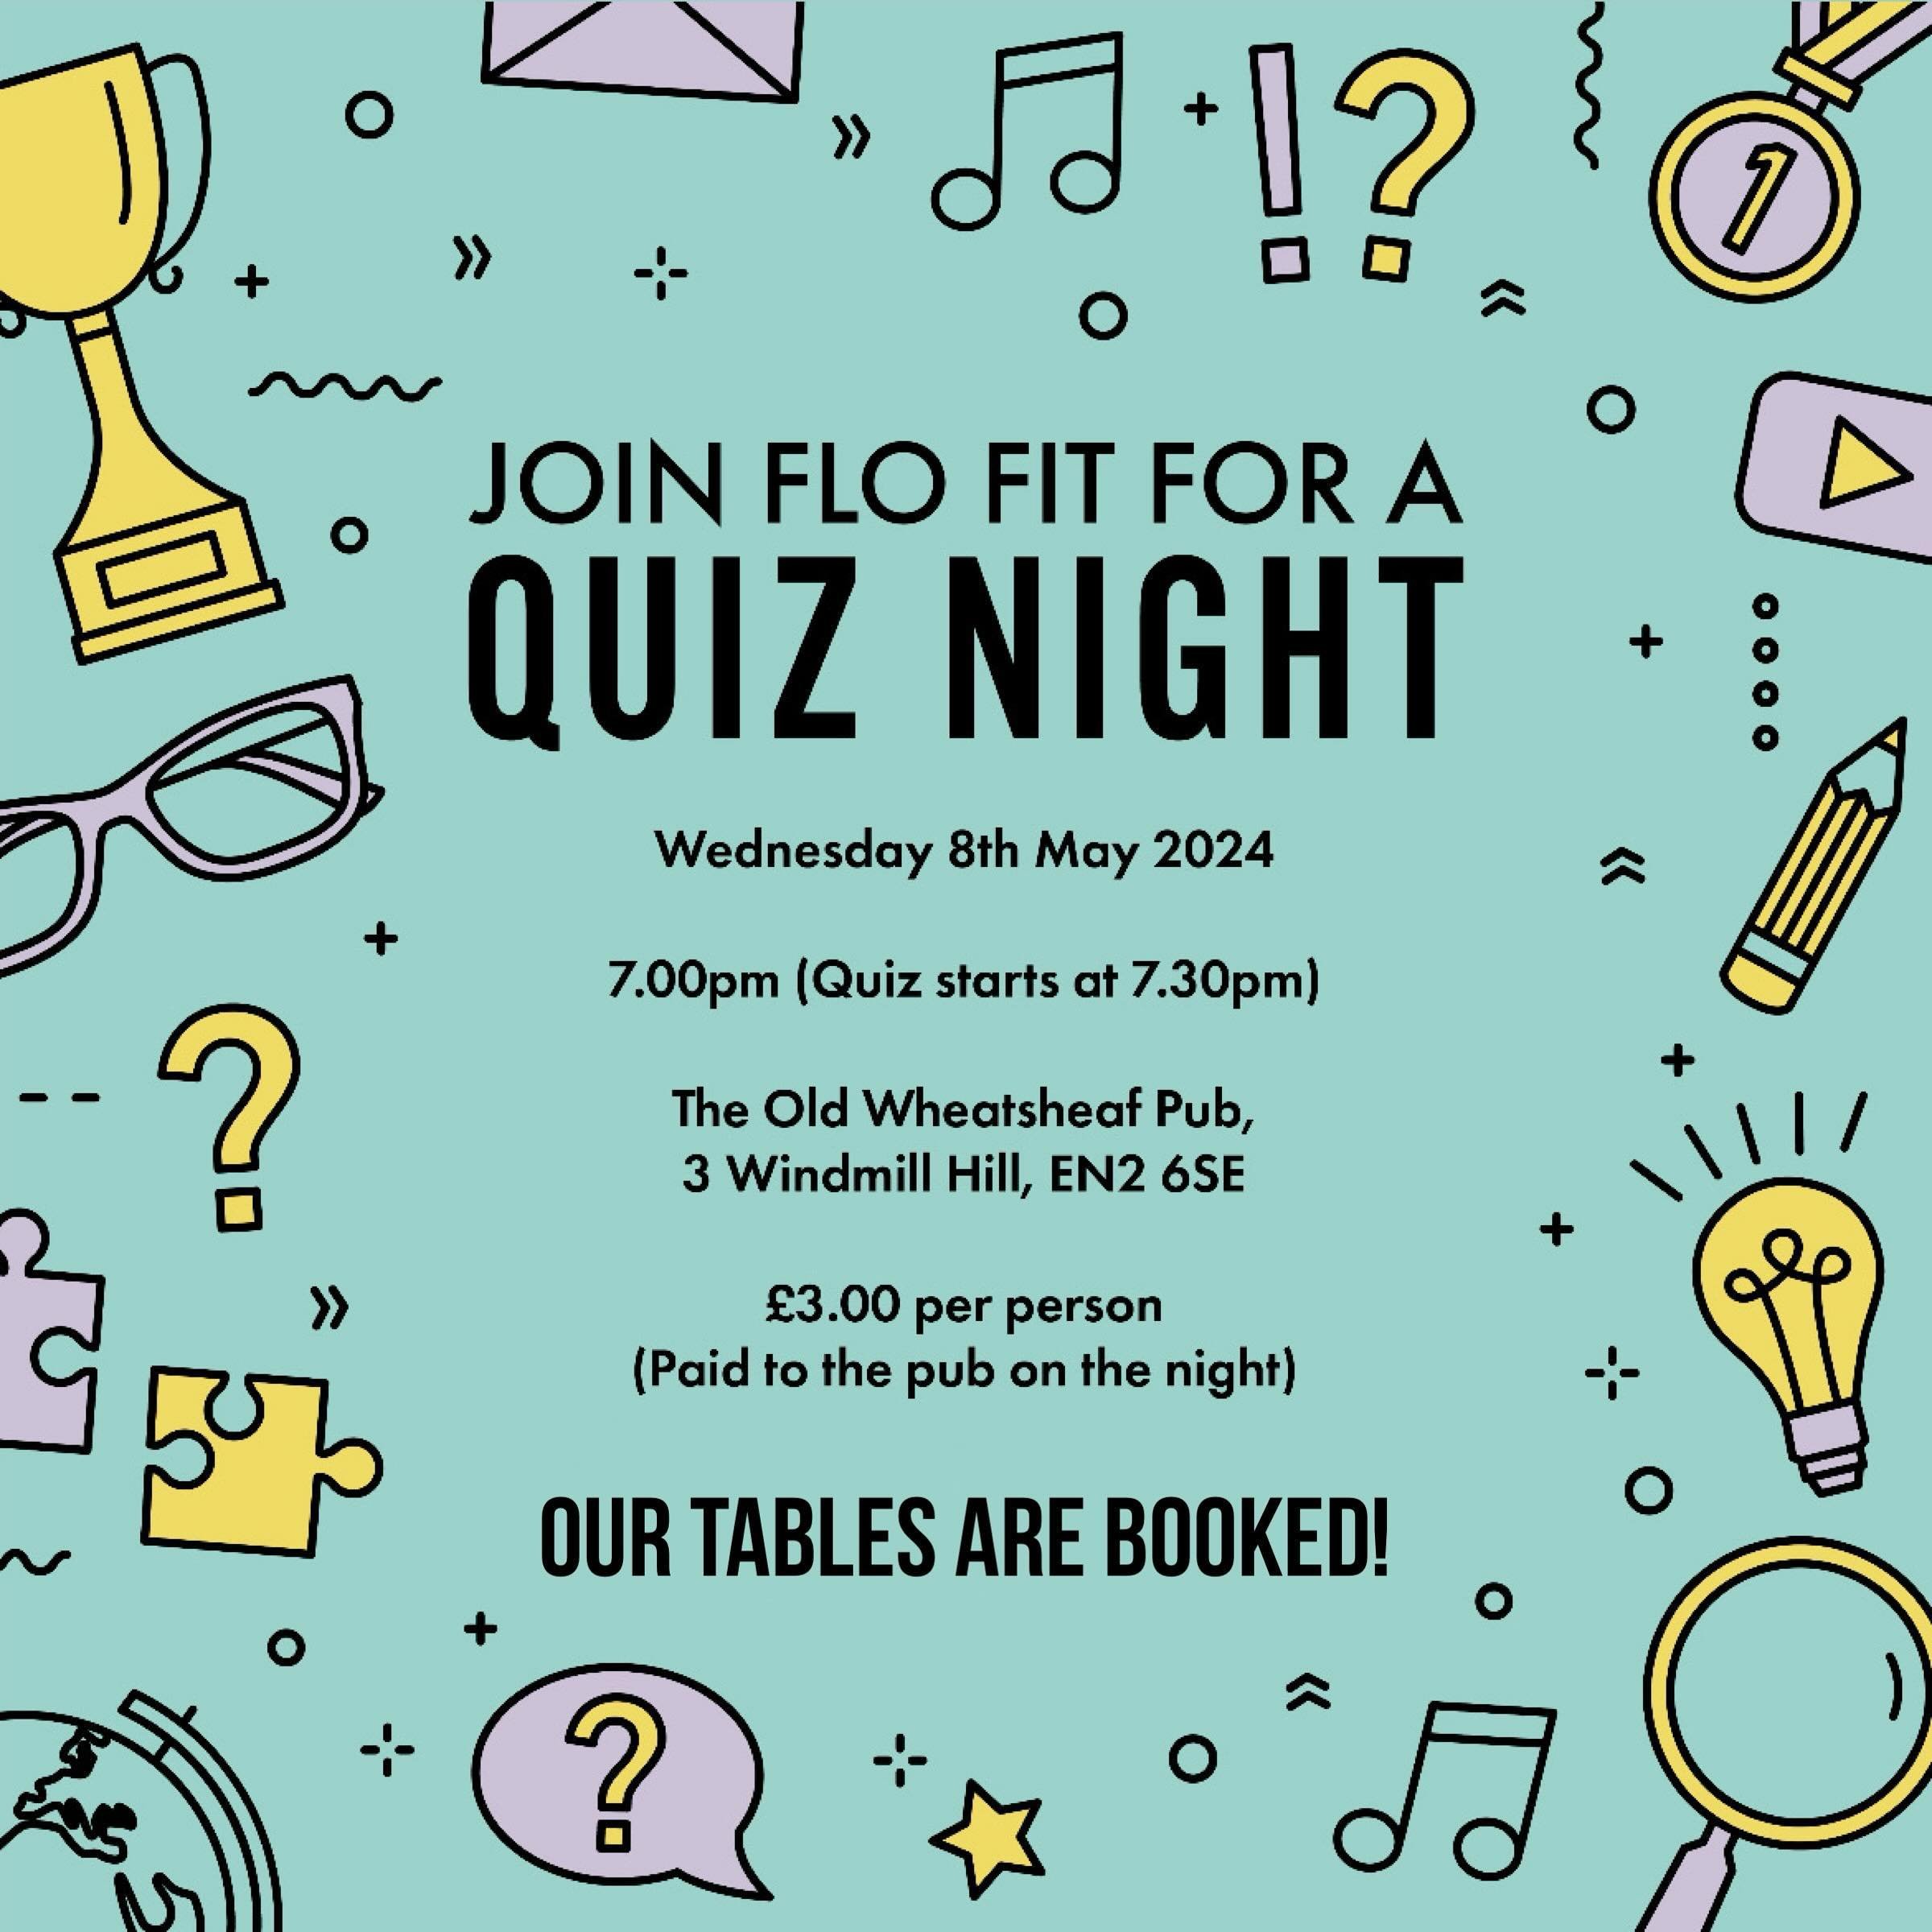 Our tables are booked for next weeks quiz night at @theoldwheatsheaf 🎉 Plenty of time to get some general knowledge revision in 😂 If you would like to join please let me know. 

#flofit #flofitclasses #havefunandgetfit #groupexercise #groupexercise